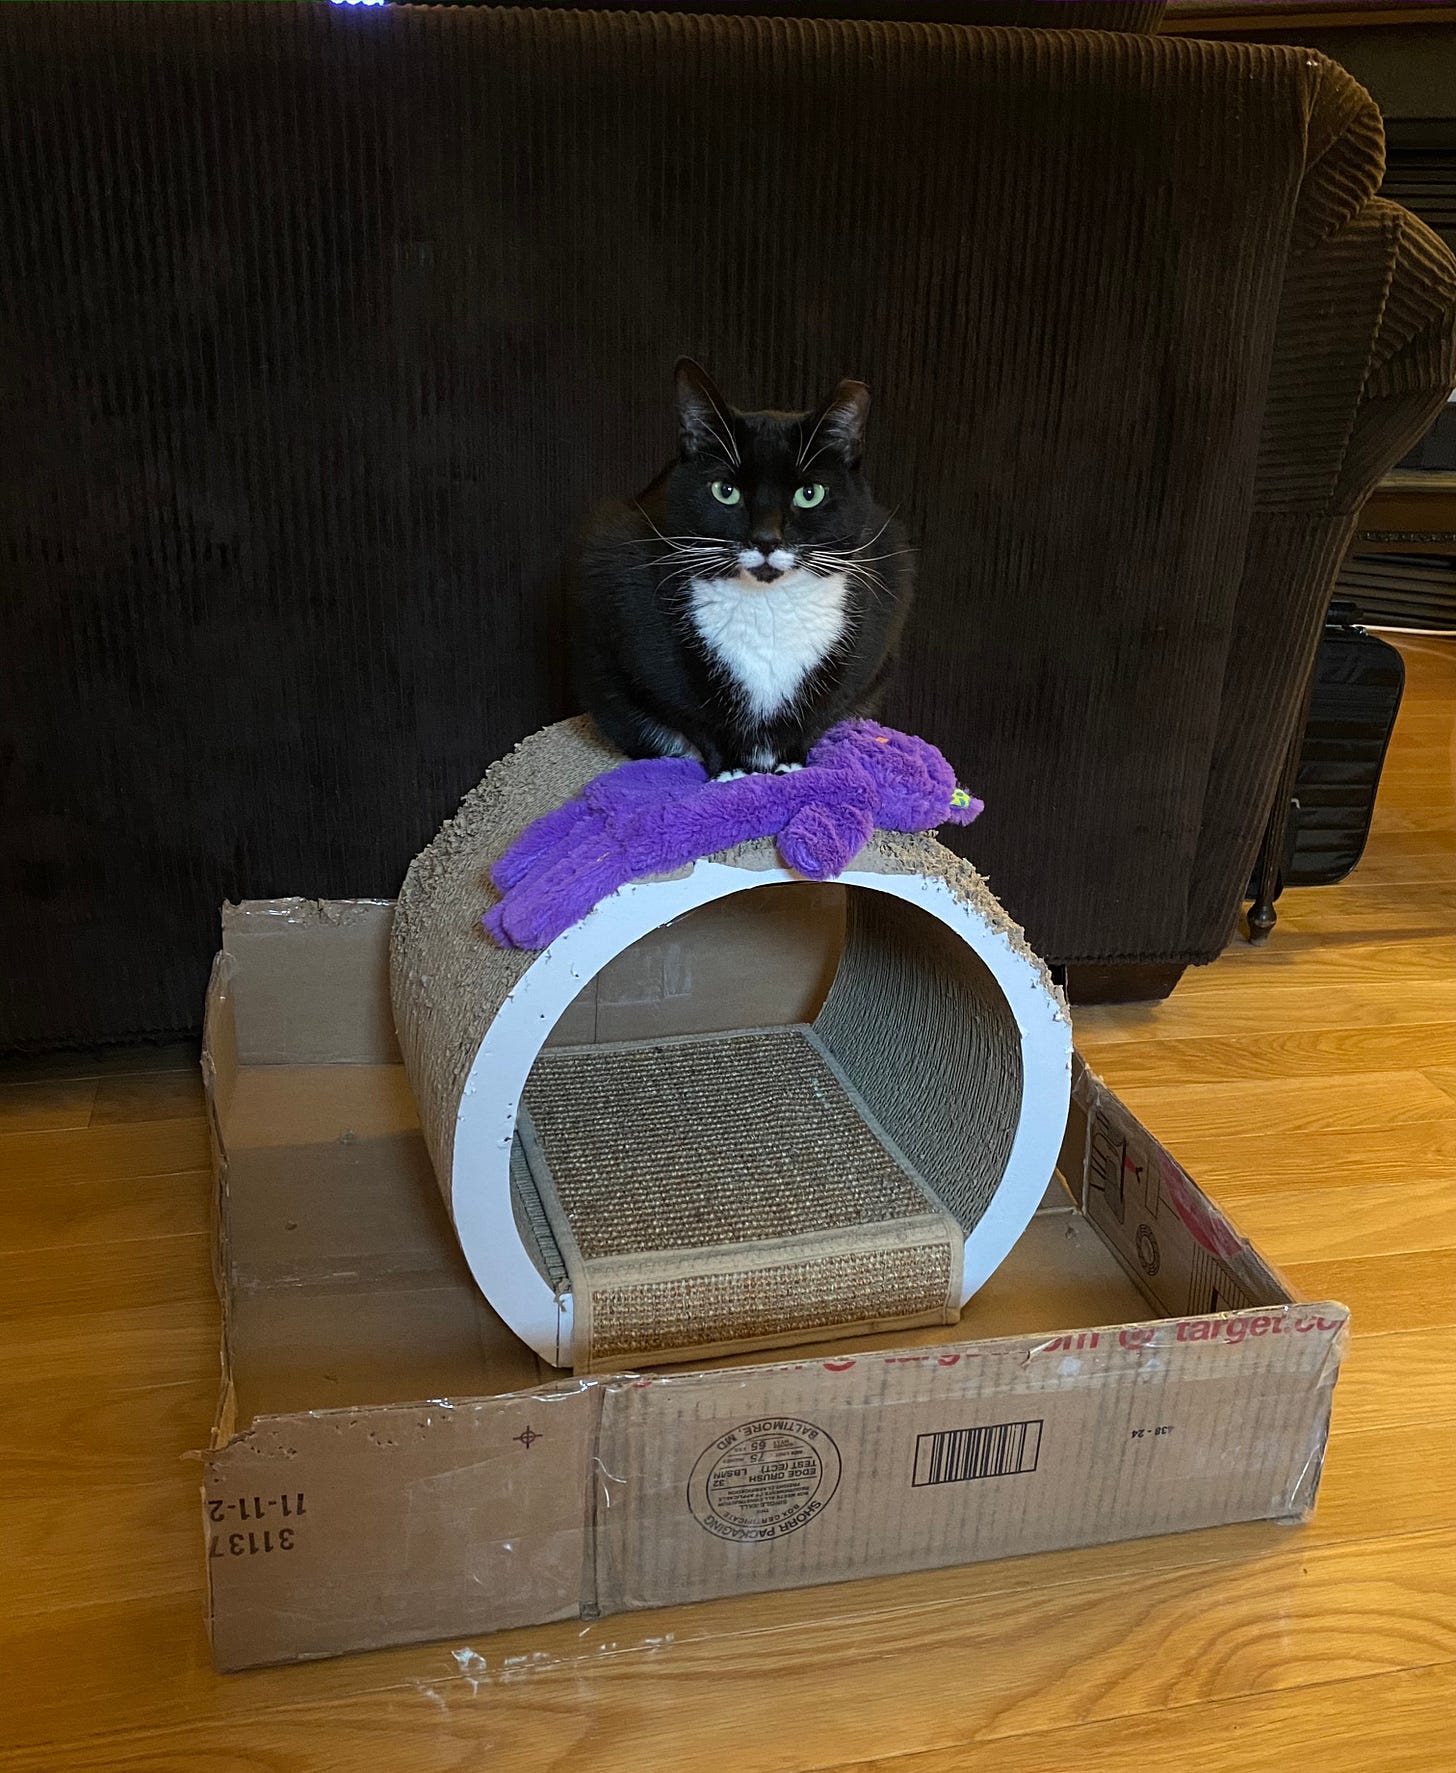 A black and white cat sits on top of a purple cat toy in the shape of a cat, on top of a round tunnel-like cat scratcher, inside a shallow, large cardboard tray.